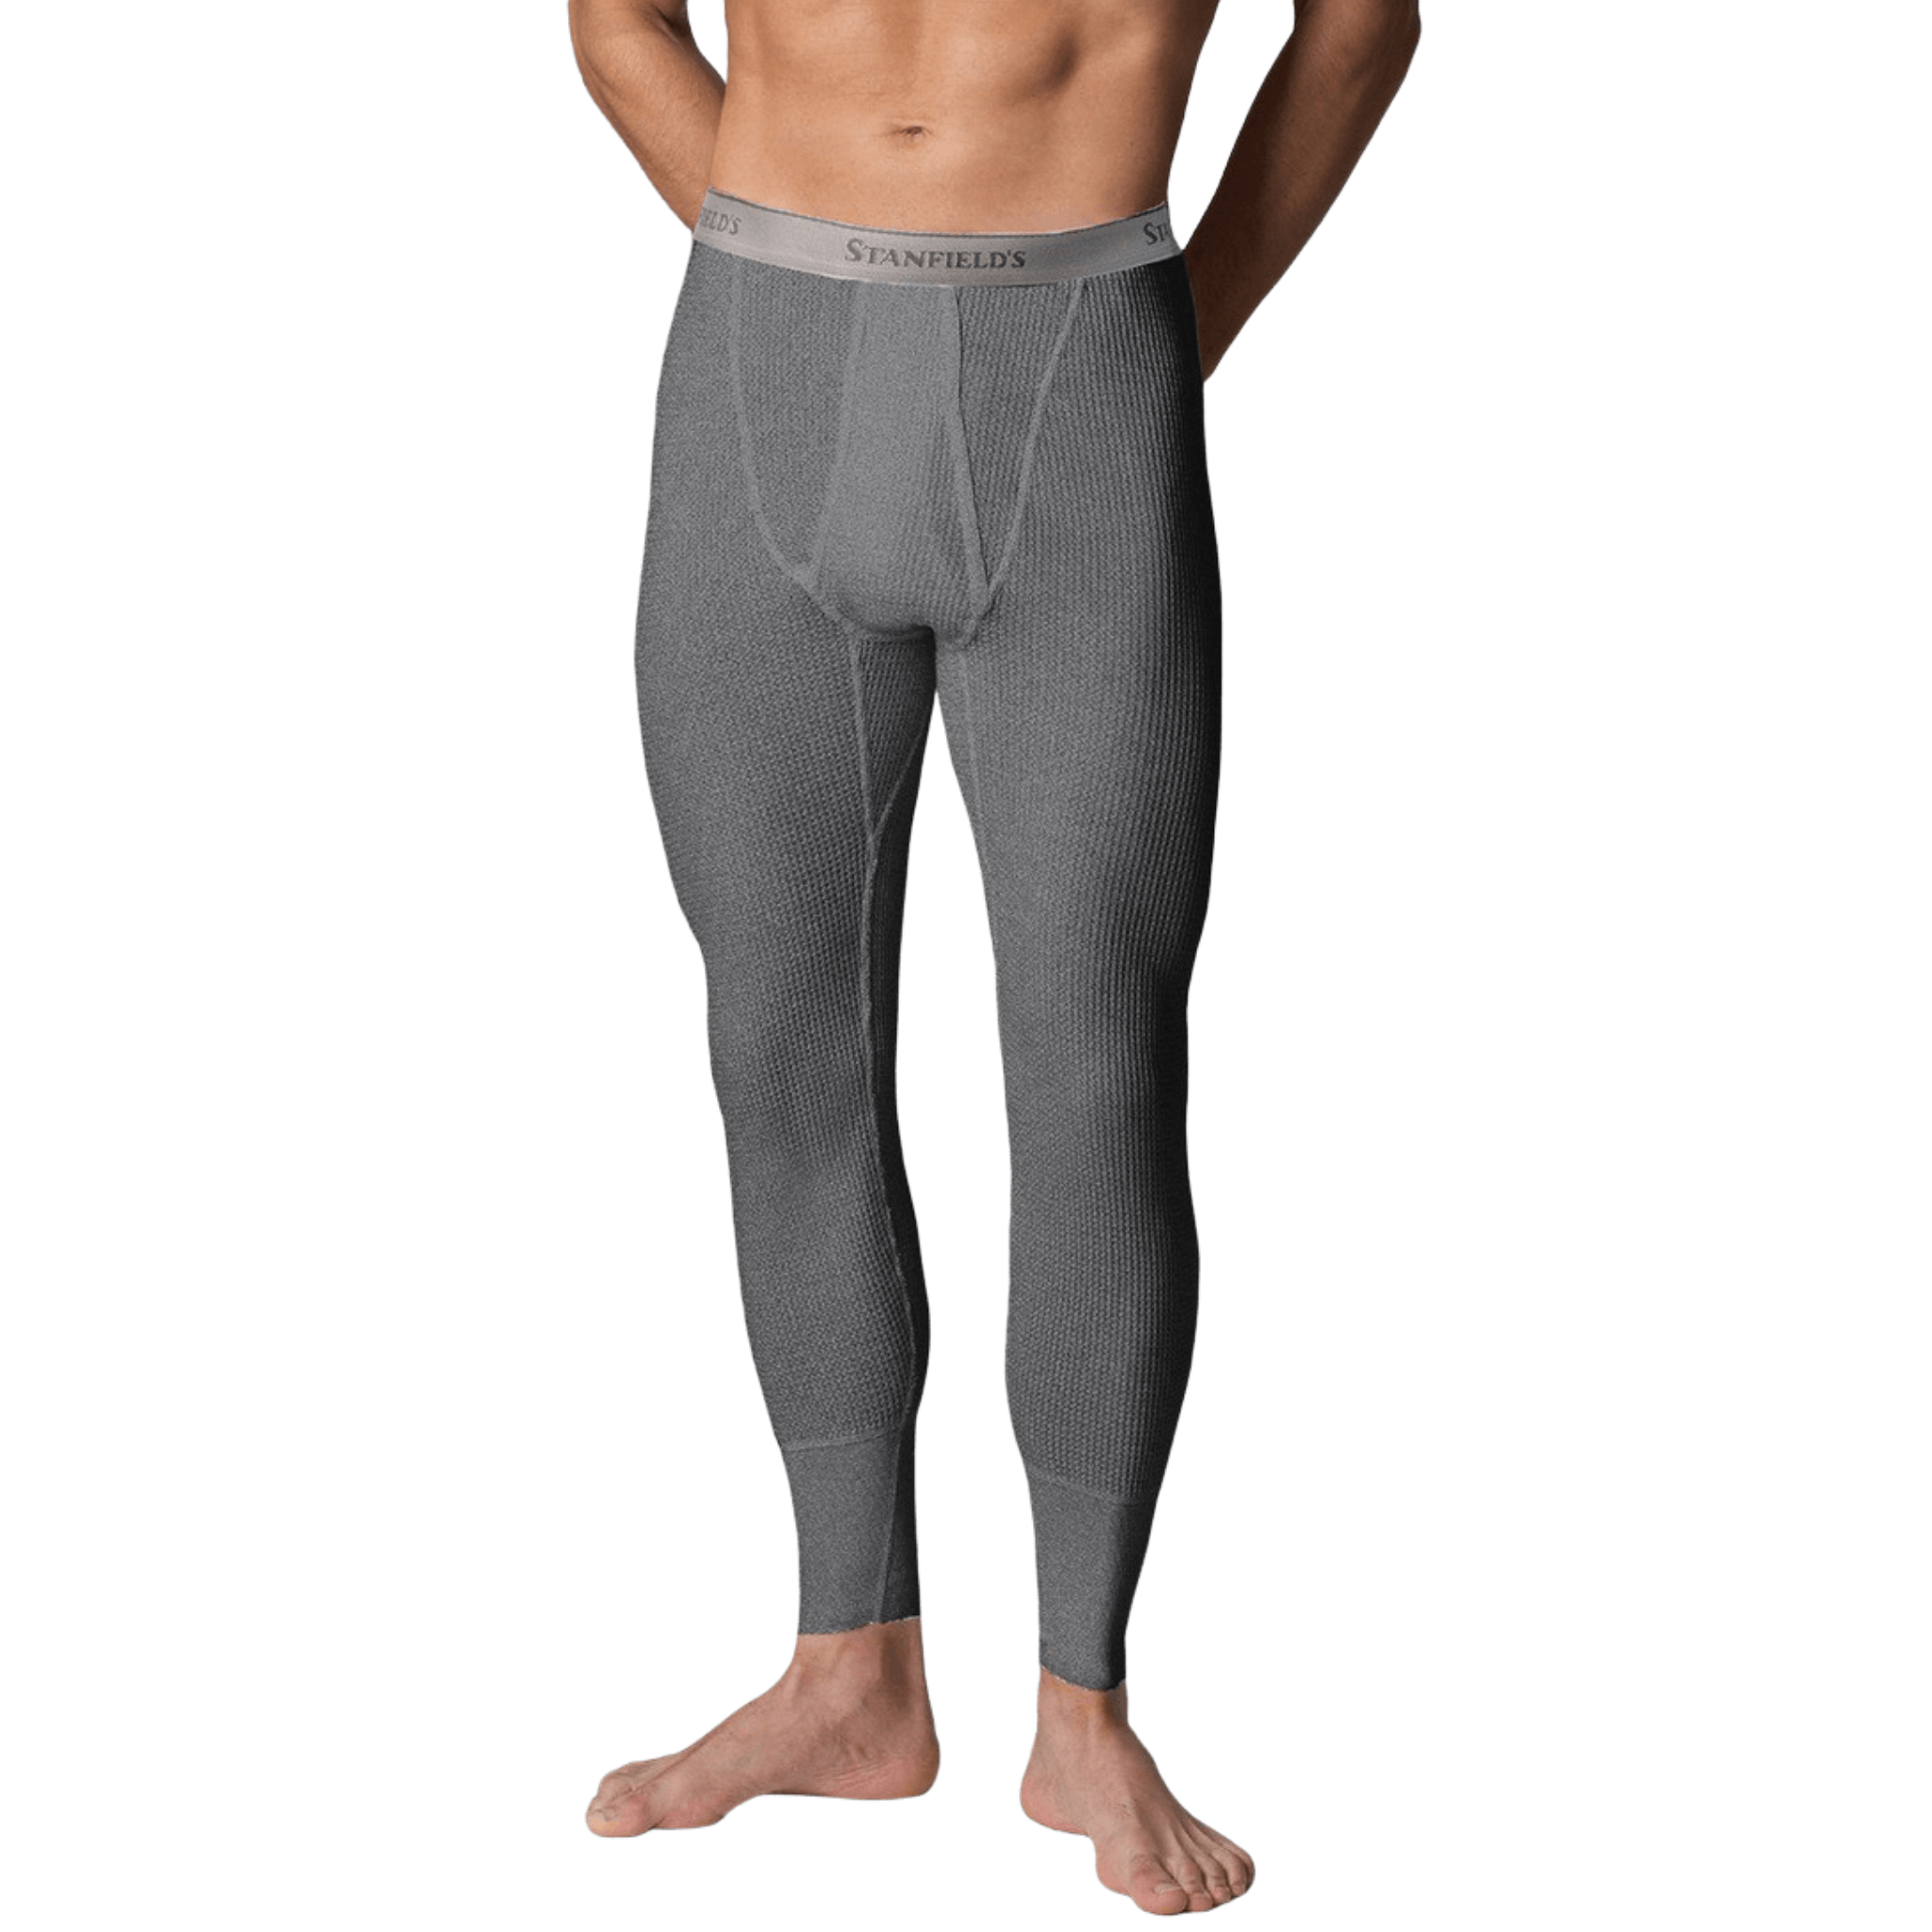 Stanfield's Thermal Long Johns - Waffle (thermal)Long Underwear - 6624